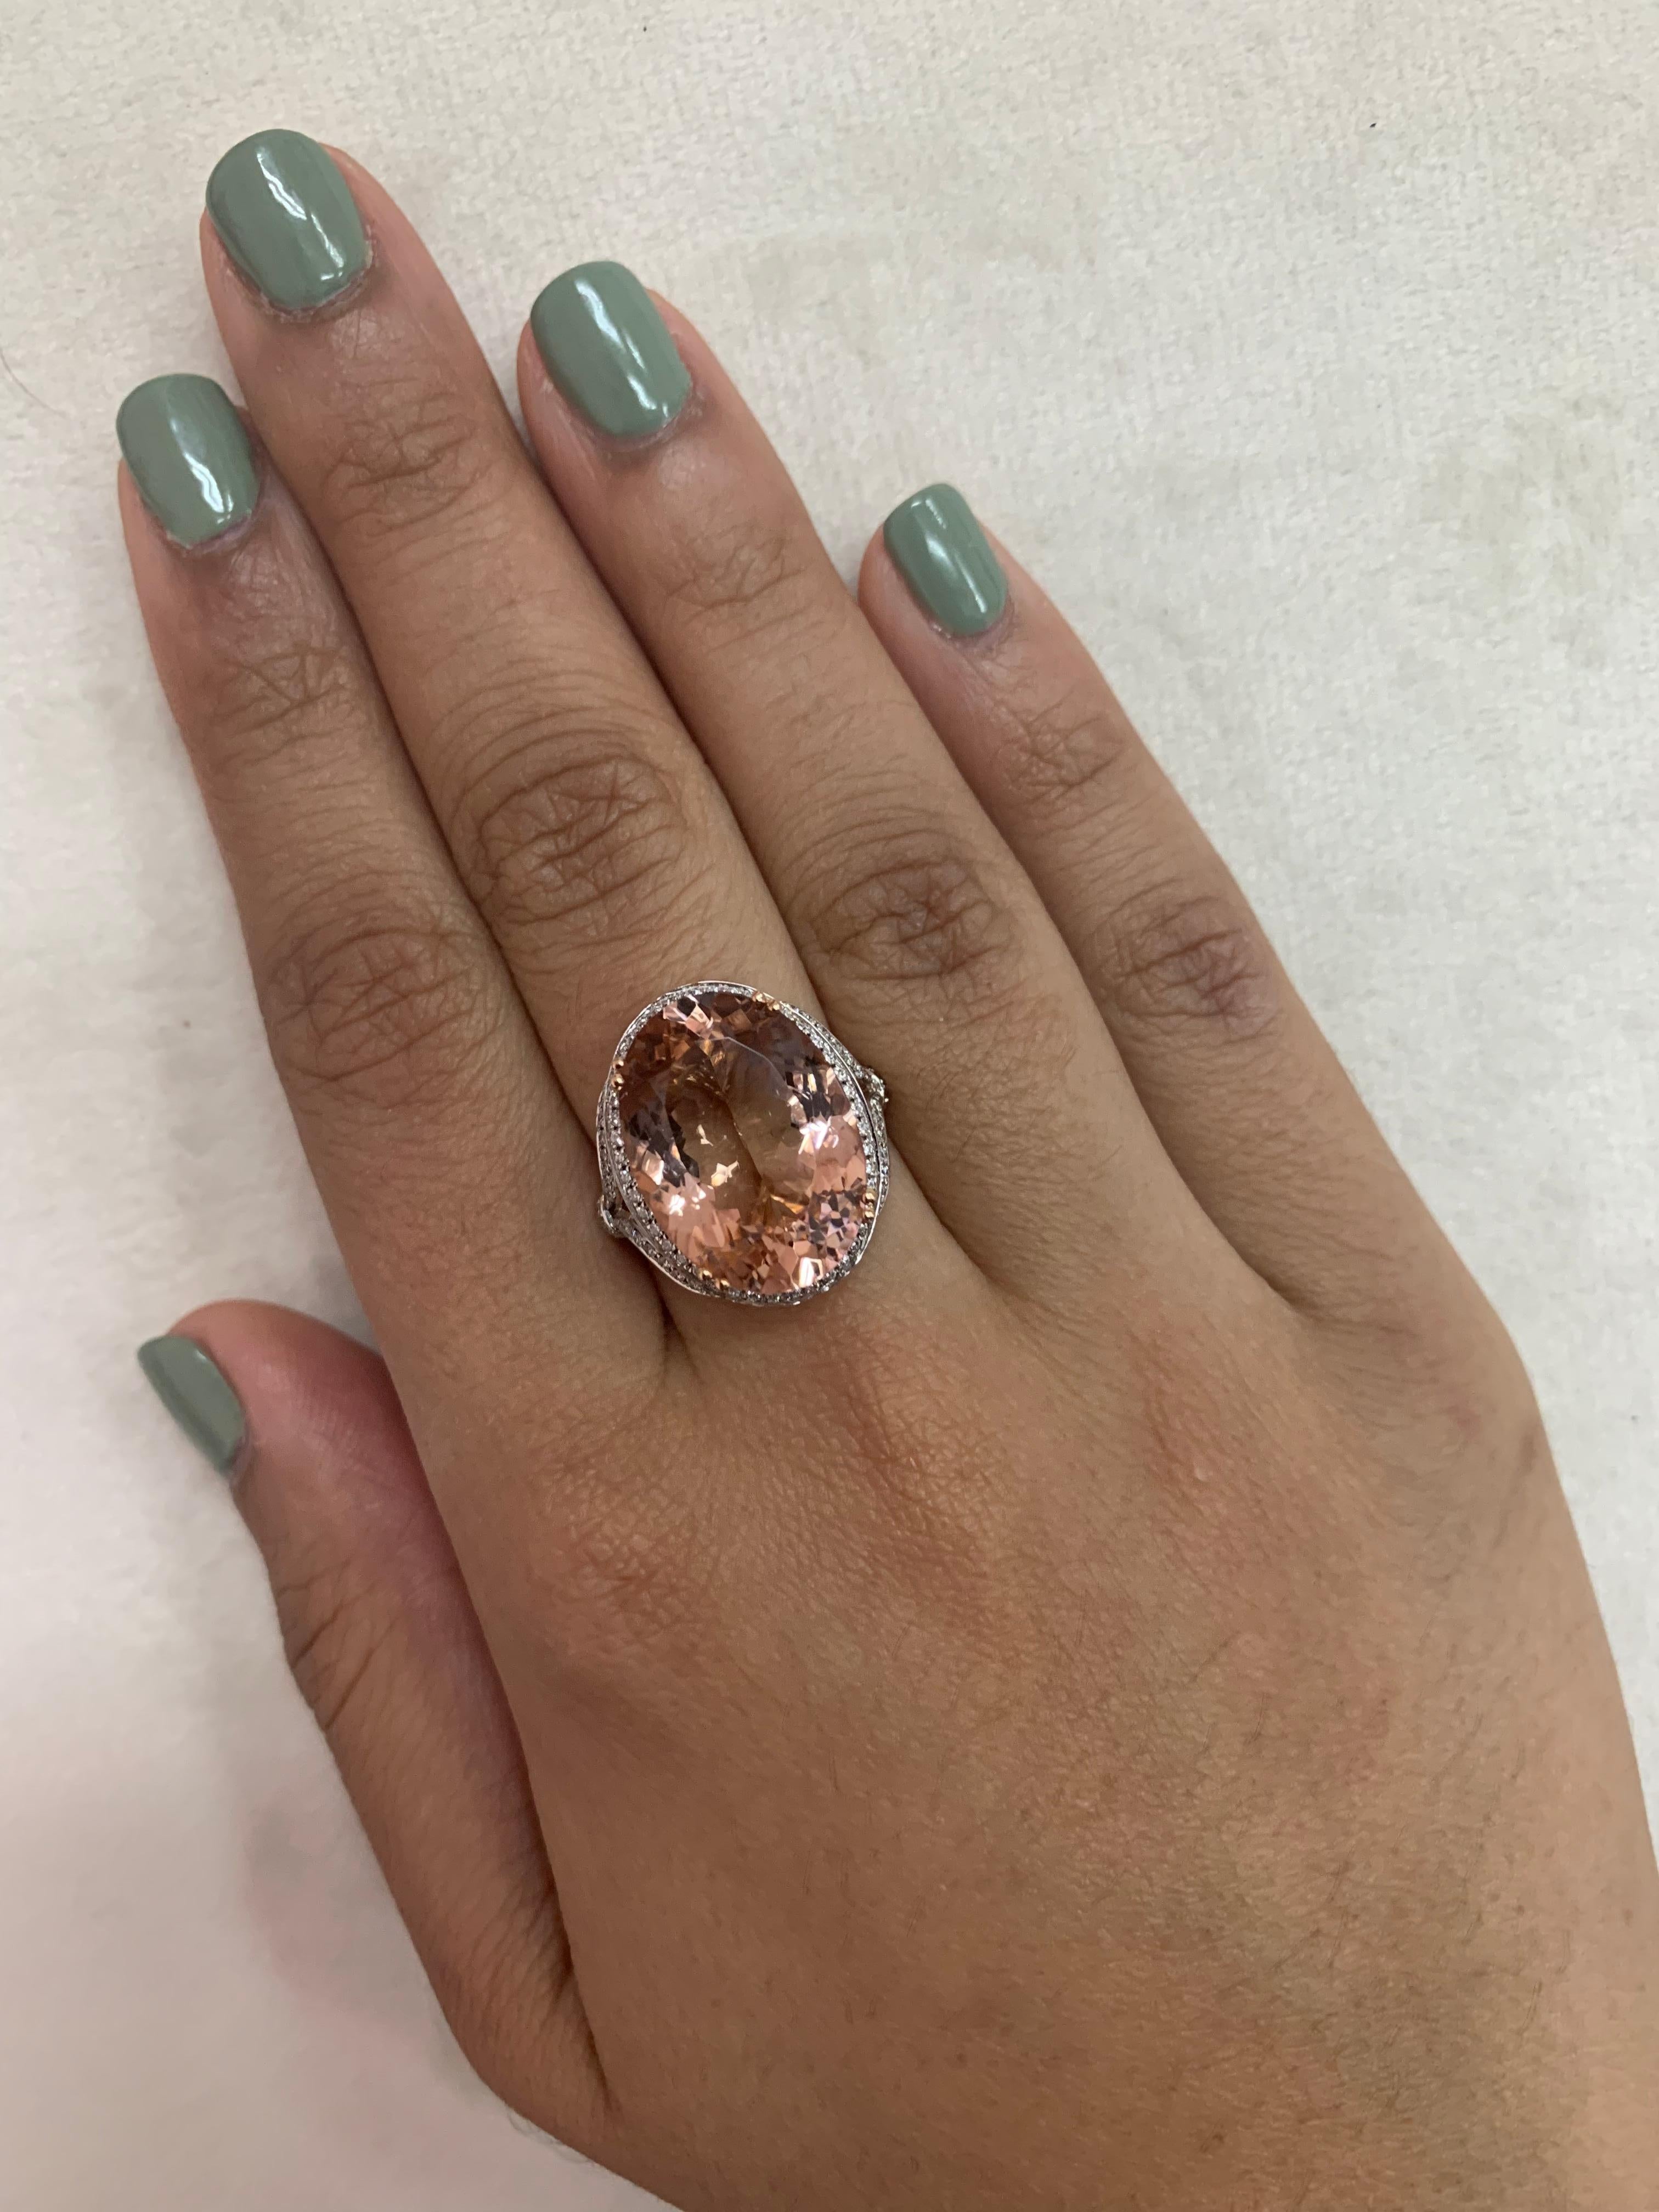 This collection features an array of magnificent morganites! Accented with diamonds these rings are made in rose gold and present a classic yet elegant look. 

Classic morganite ring in 18K rose gold with diamonds. 

Morganite: 11.84 carat oval